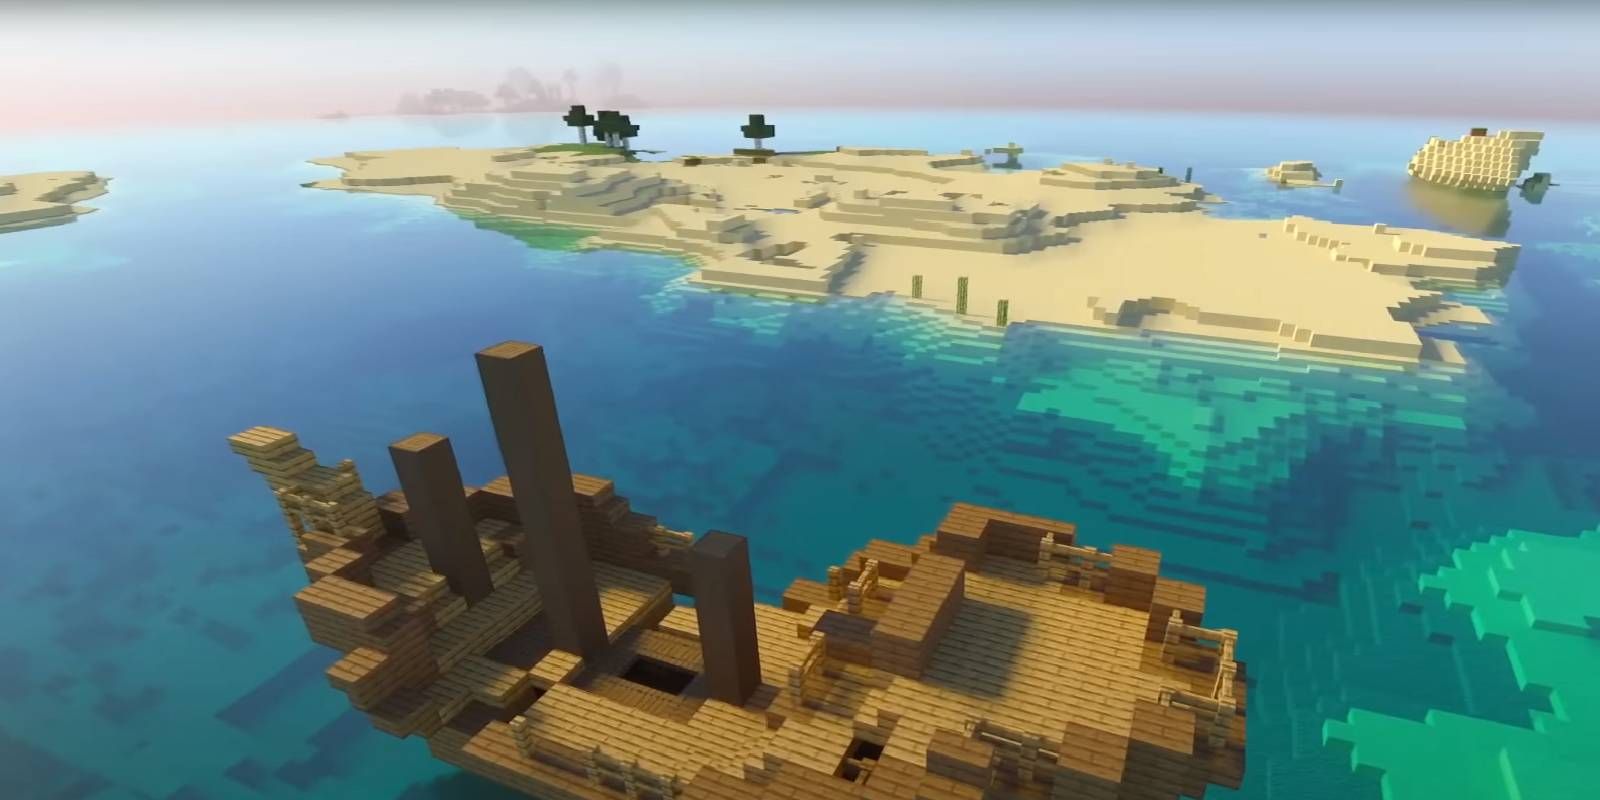 Minecraft Shipwreck Islands from Survival World Seed